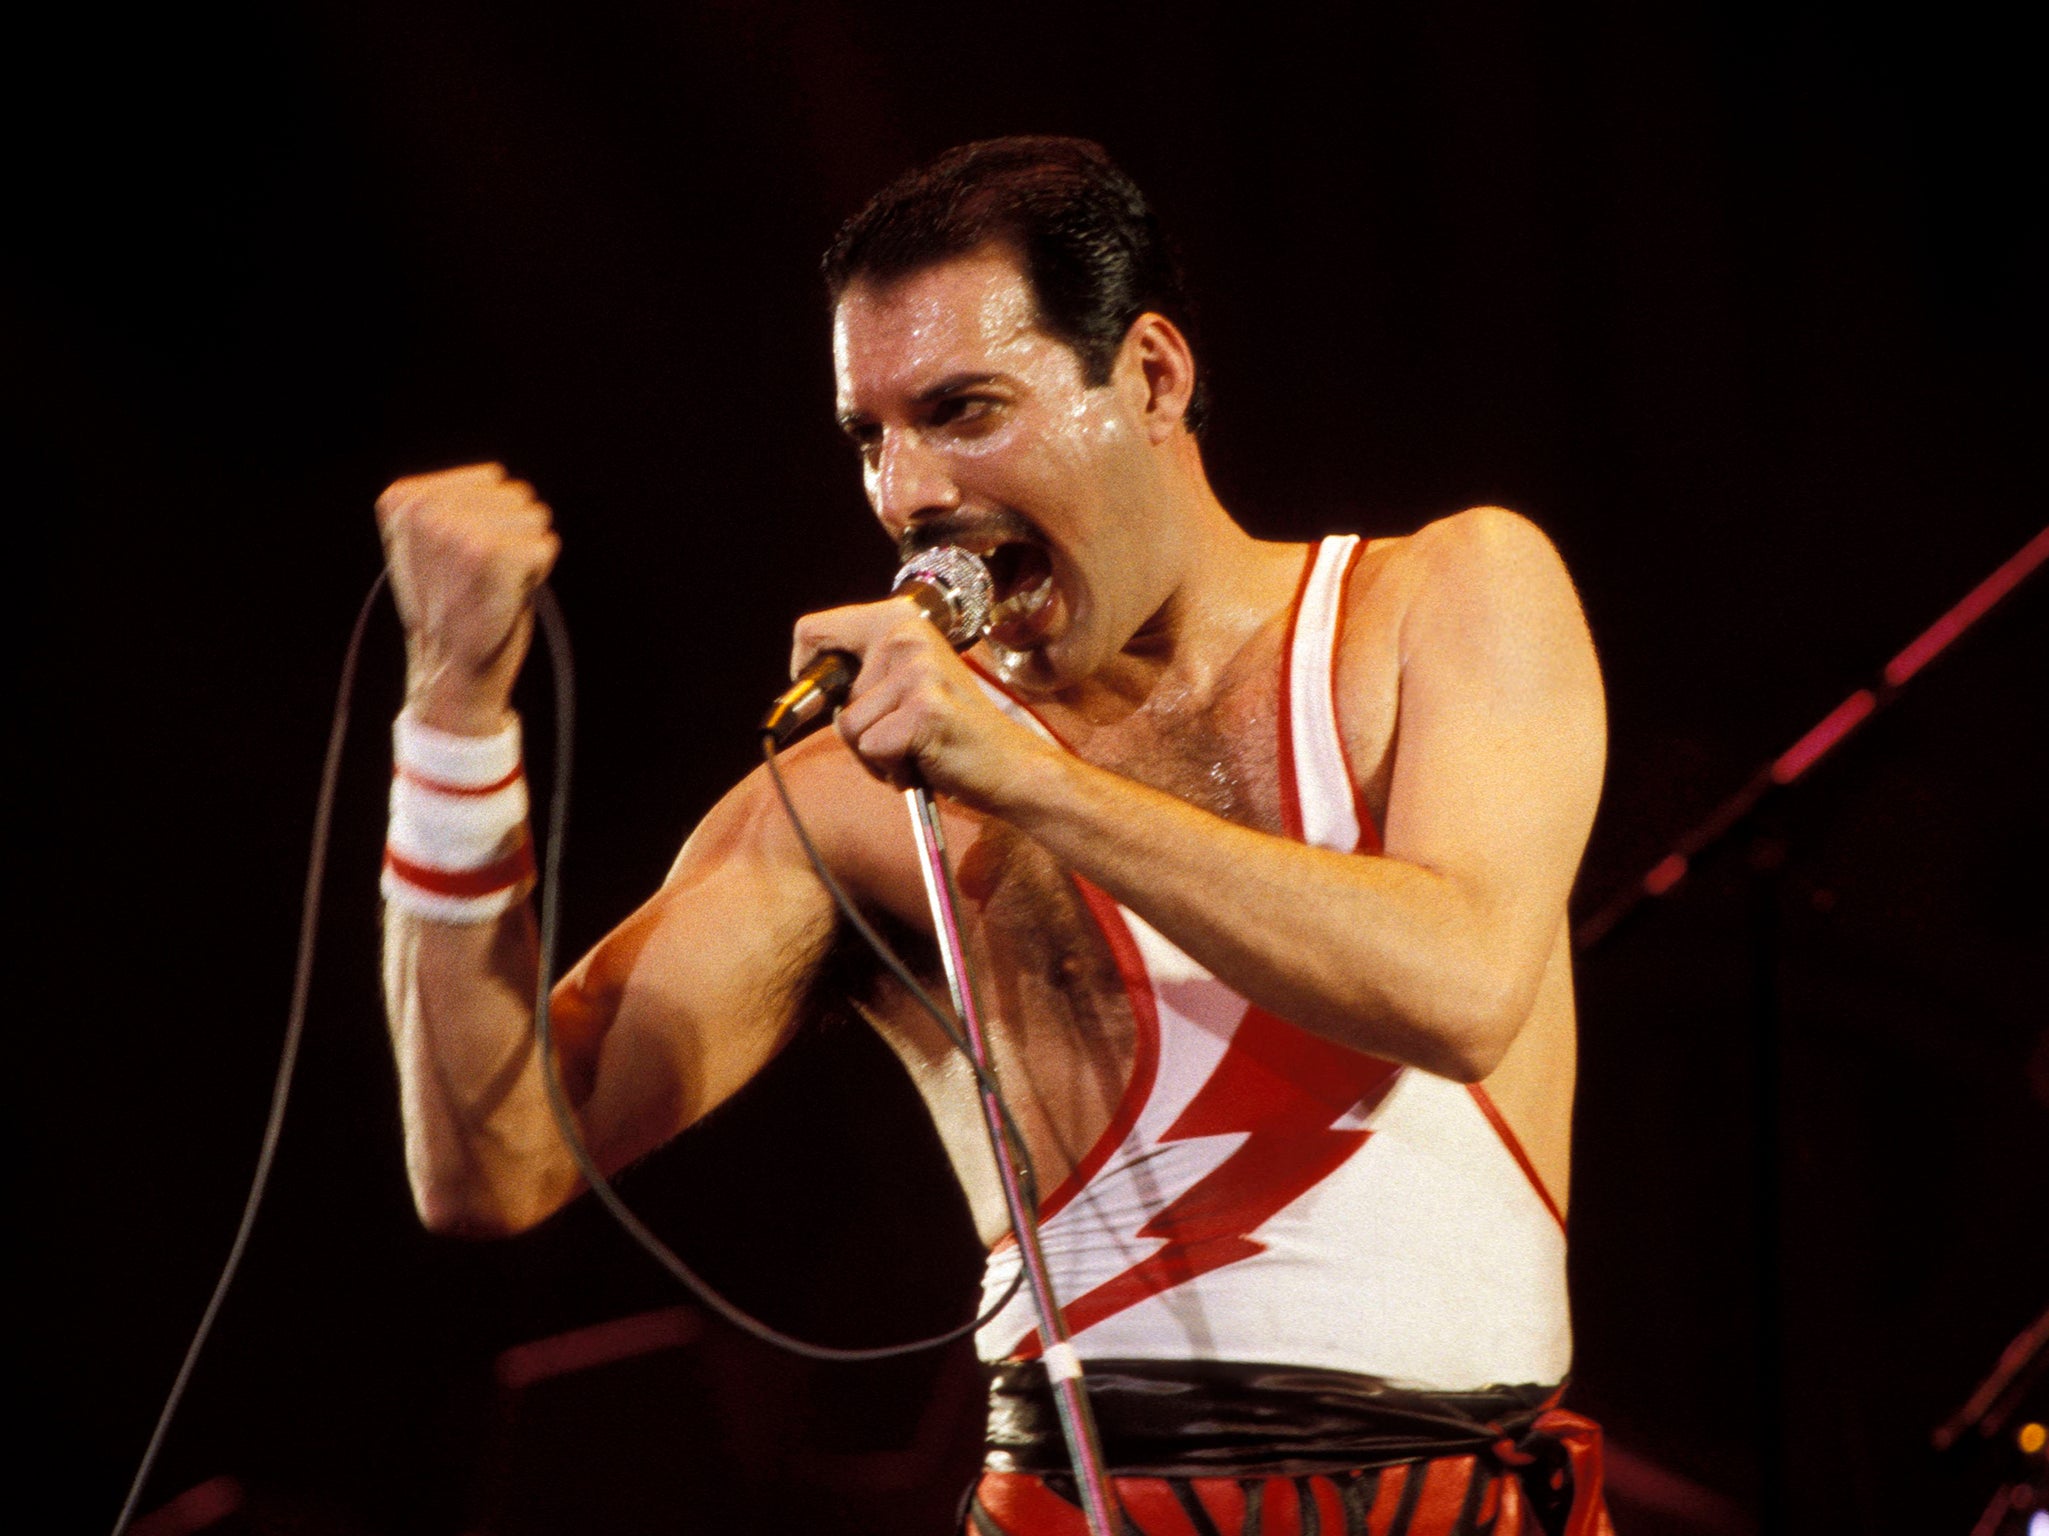  Freddie Mercury Net Worth: What is The Cause of His Death?